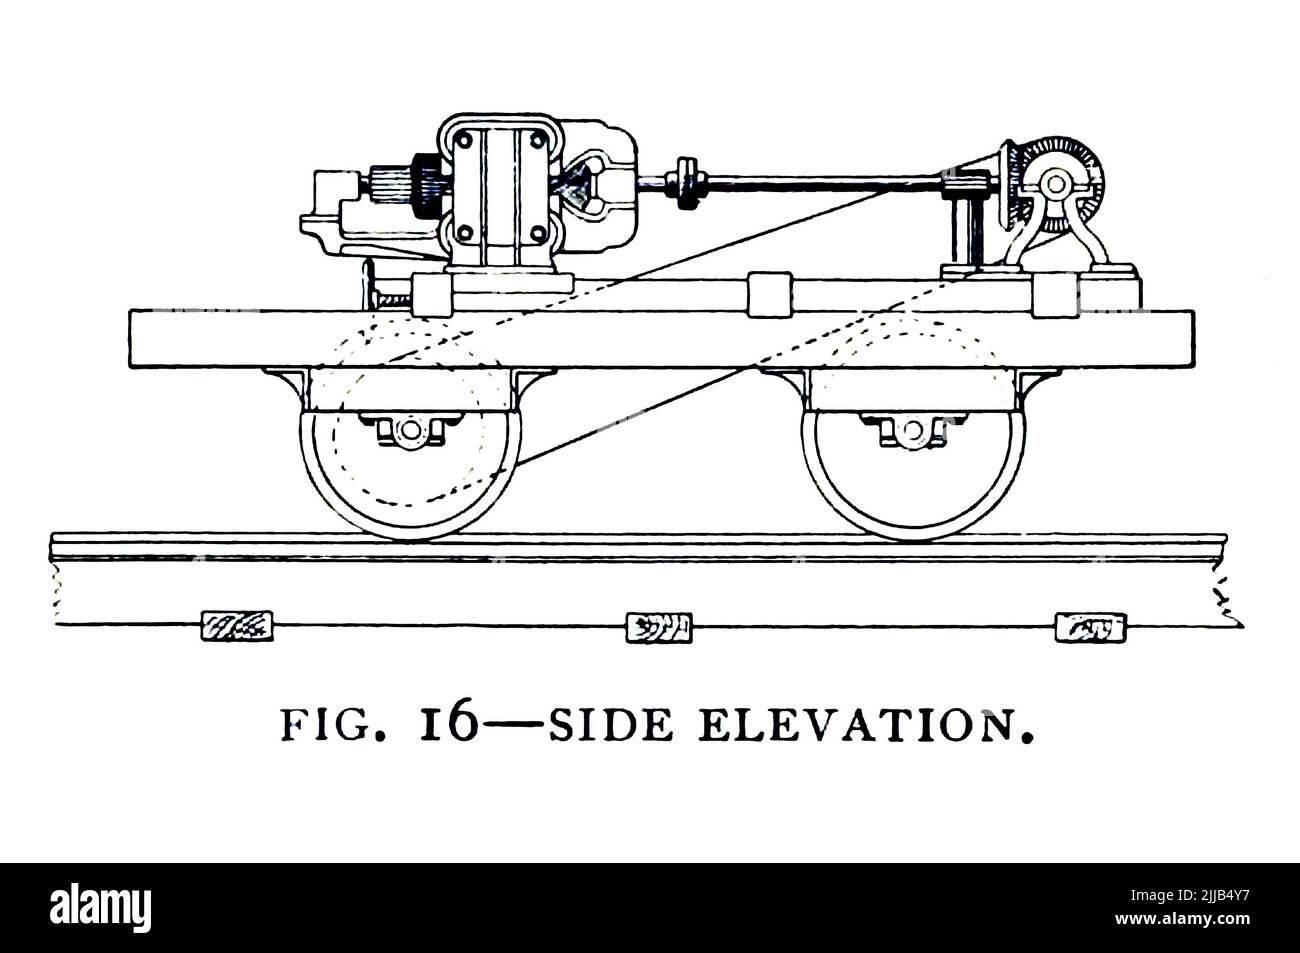 Side Elevation of 'THE JUDGE' OPERATED IN CHICAGO IN 1883 from the article ' DEVELOPMENT OF THE ELECTRIC LOCOMOTIVE ' By B. J. Arnold, M. Am. Inst. E. E. from The Engineering Magazine DEVOTED TO INDUSTRIAL PROGRESS Volume VII April to September, 1894 NEW YORK The Engineering Magazine Co Stock Photo